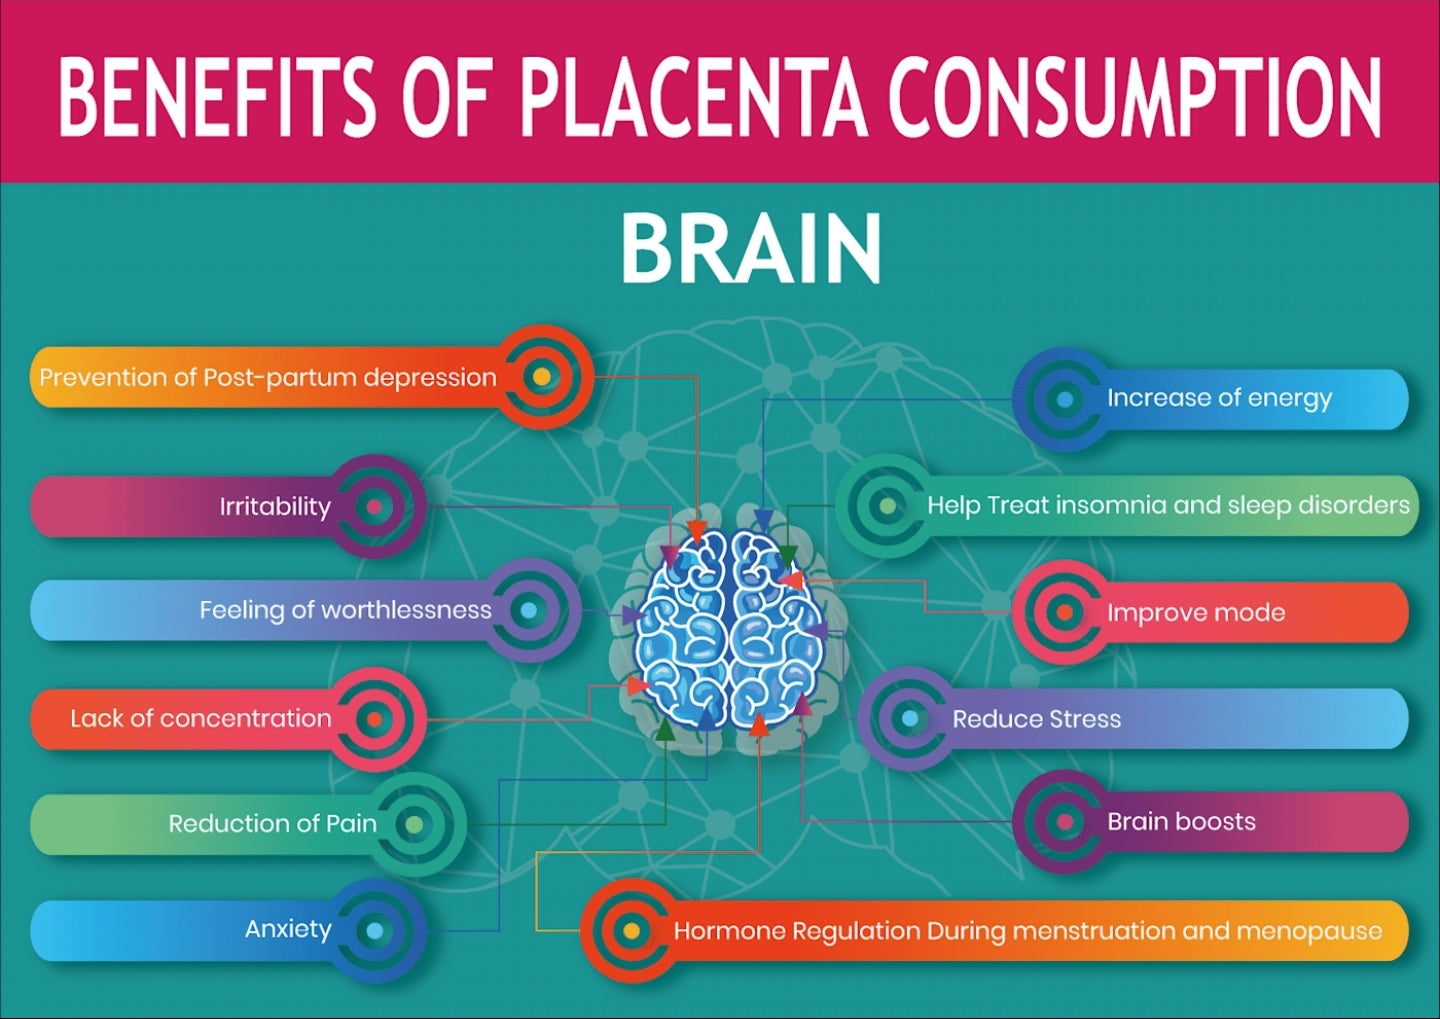 Benefits of placenta consumption to the brain